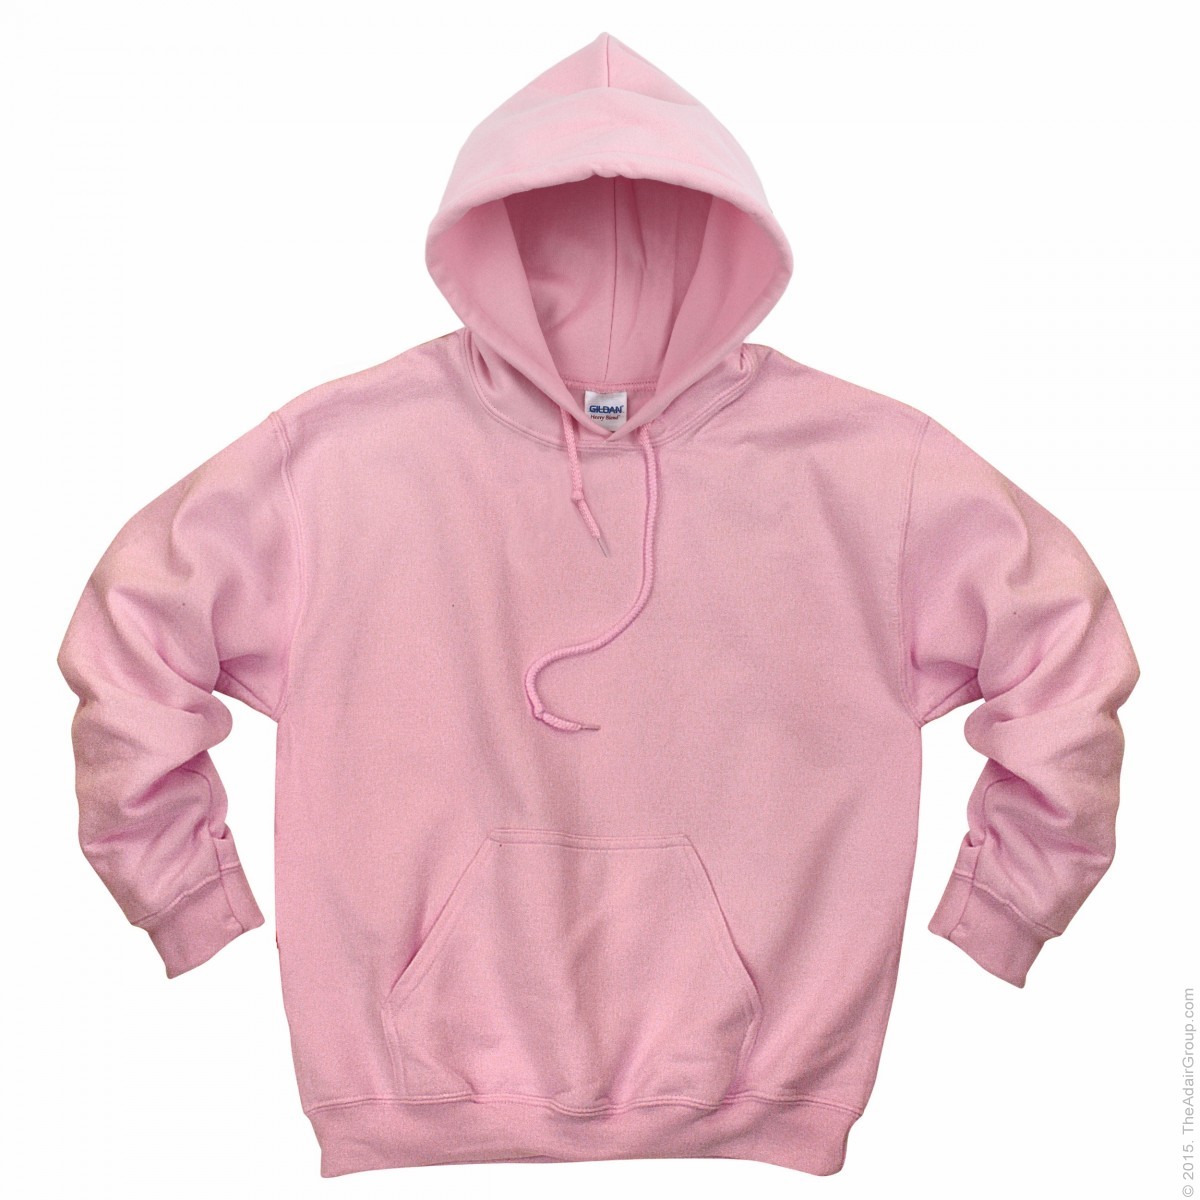 Blank Pullover Hoodies at Wholesale Prices from Adair